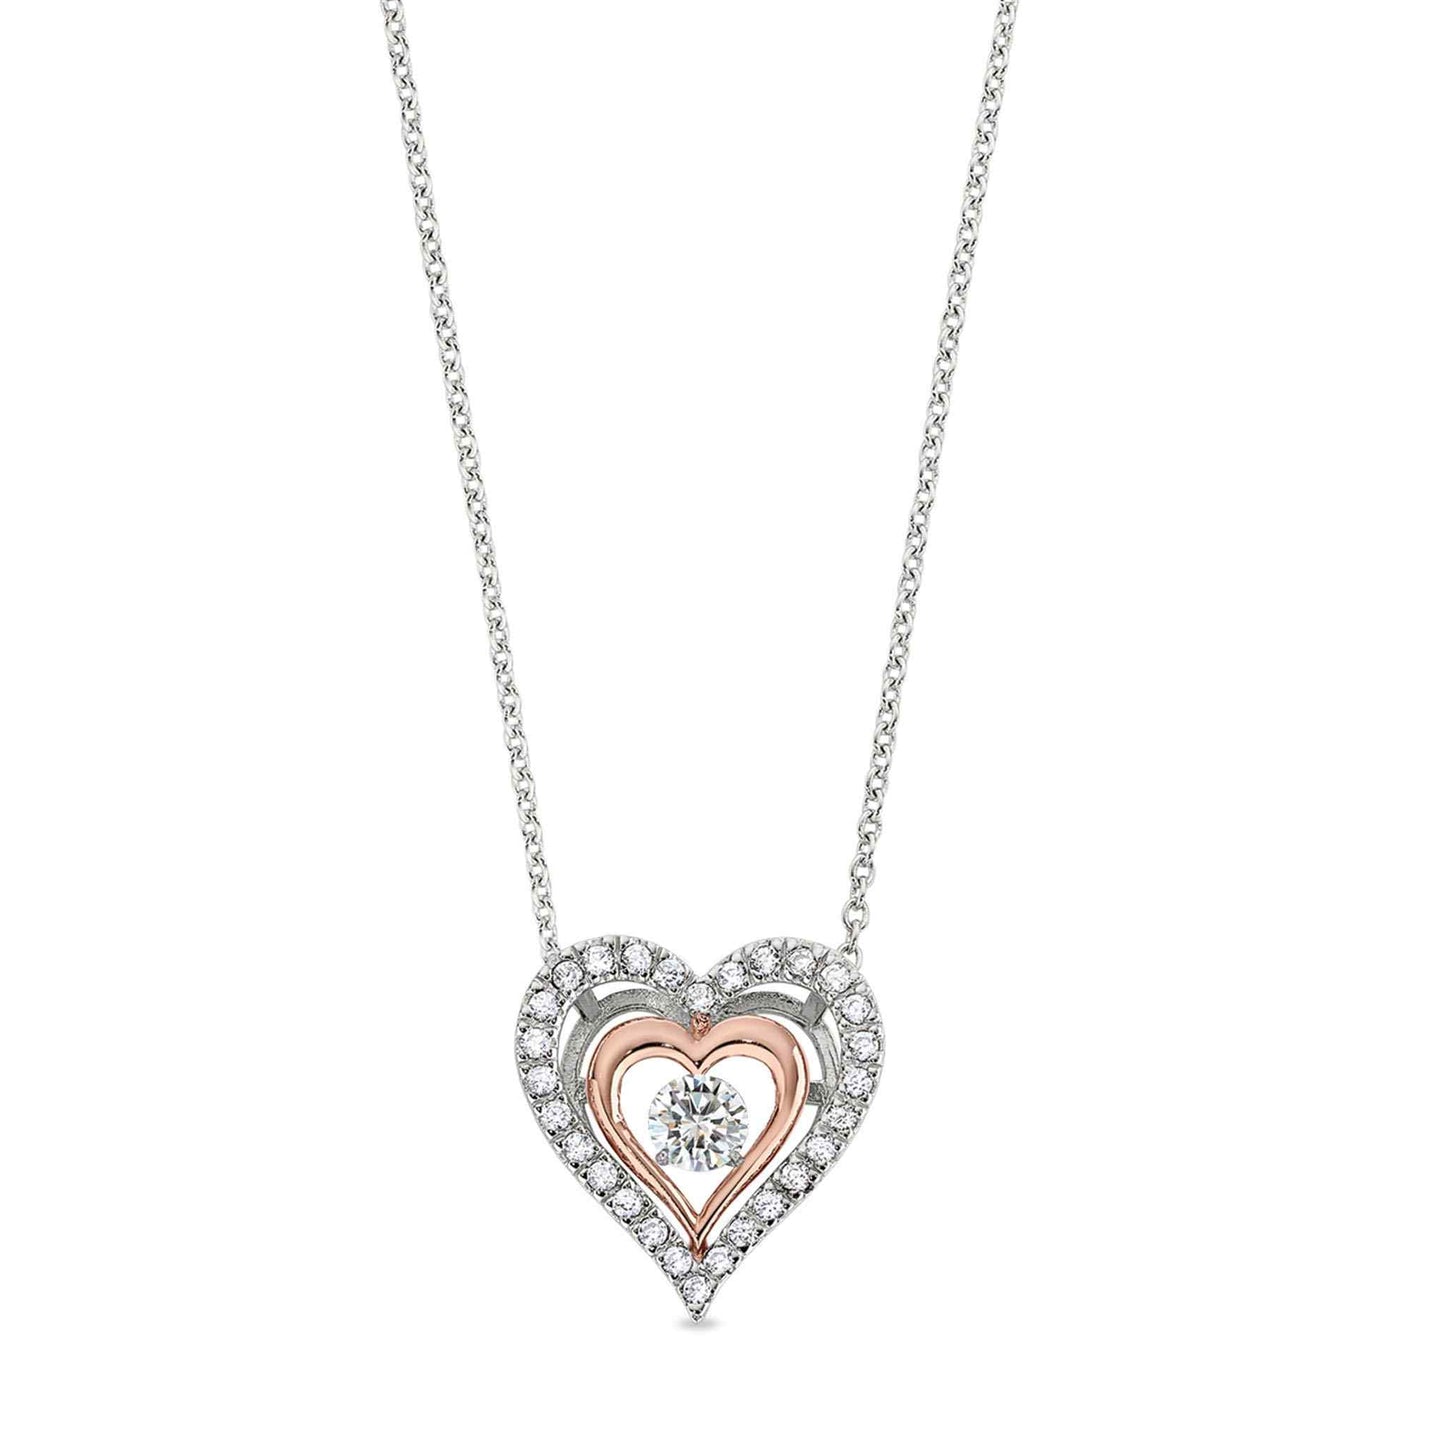 A dancing stone sterling silver heart necklace with simulated diamonds displayed on a neutral white background.